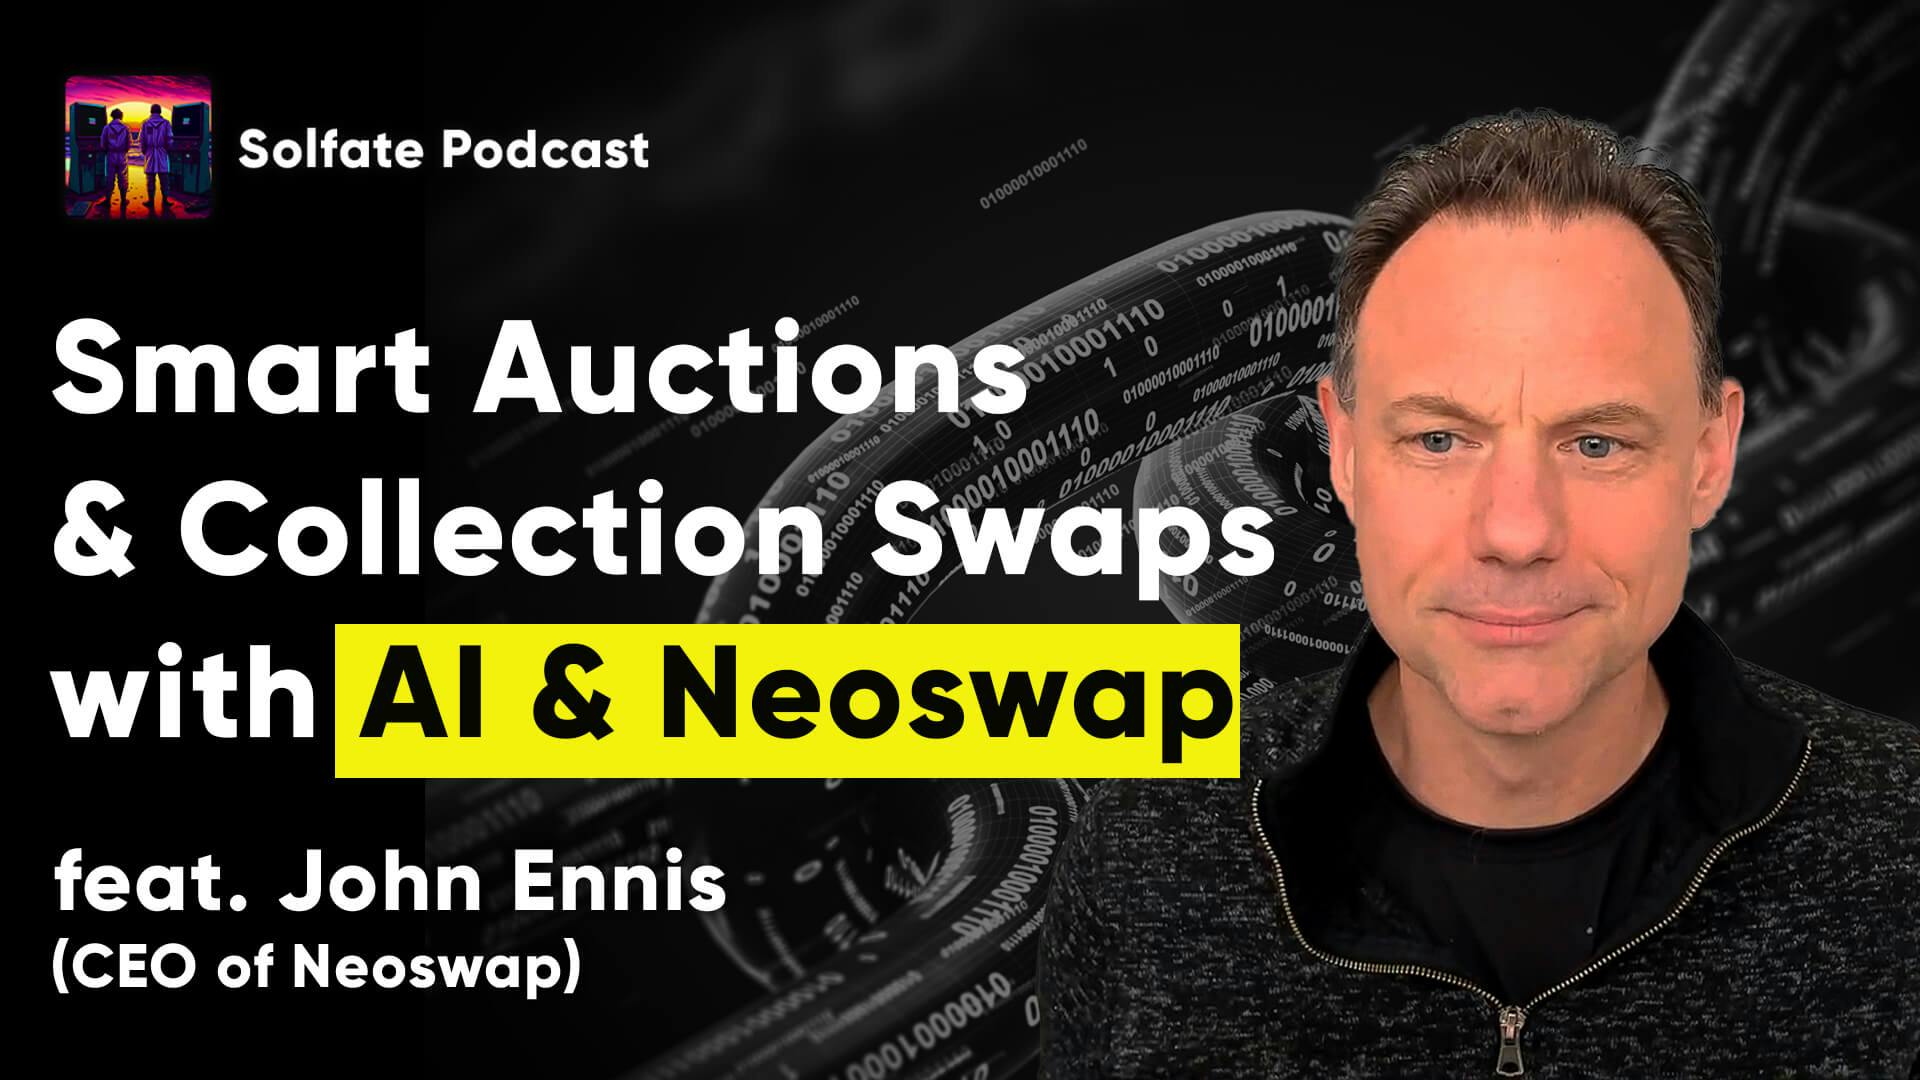 NeoSwap: Smart auctions for perfect swaps